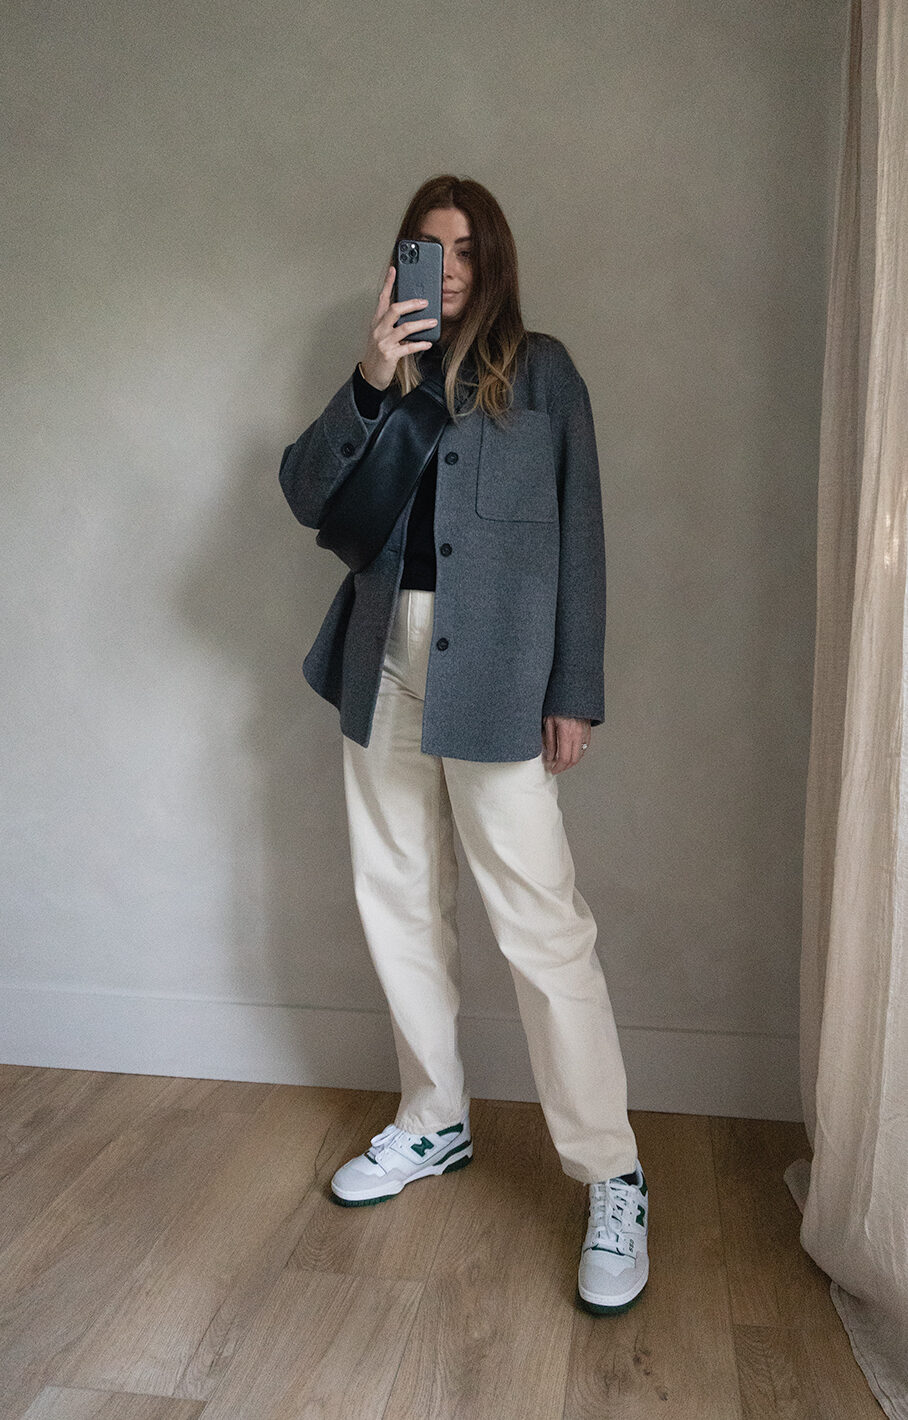 Emma Hill style. Grey wool shacket overshirt, black jumper, cream off white tapered jeans, New Balance 550 white and green, Black cross body sling bag. Casual Spring outfit